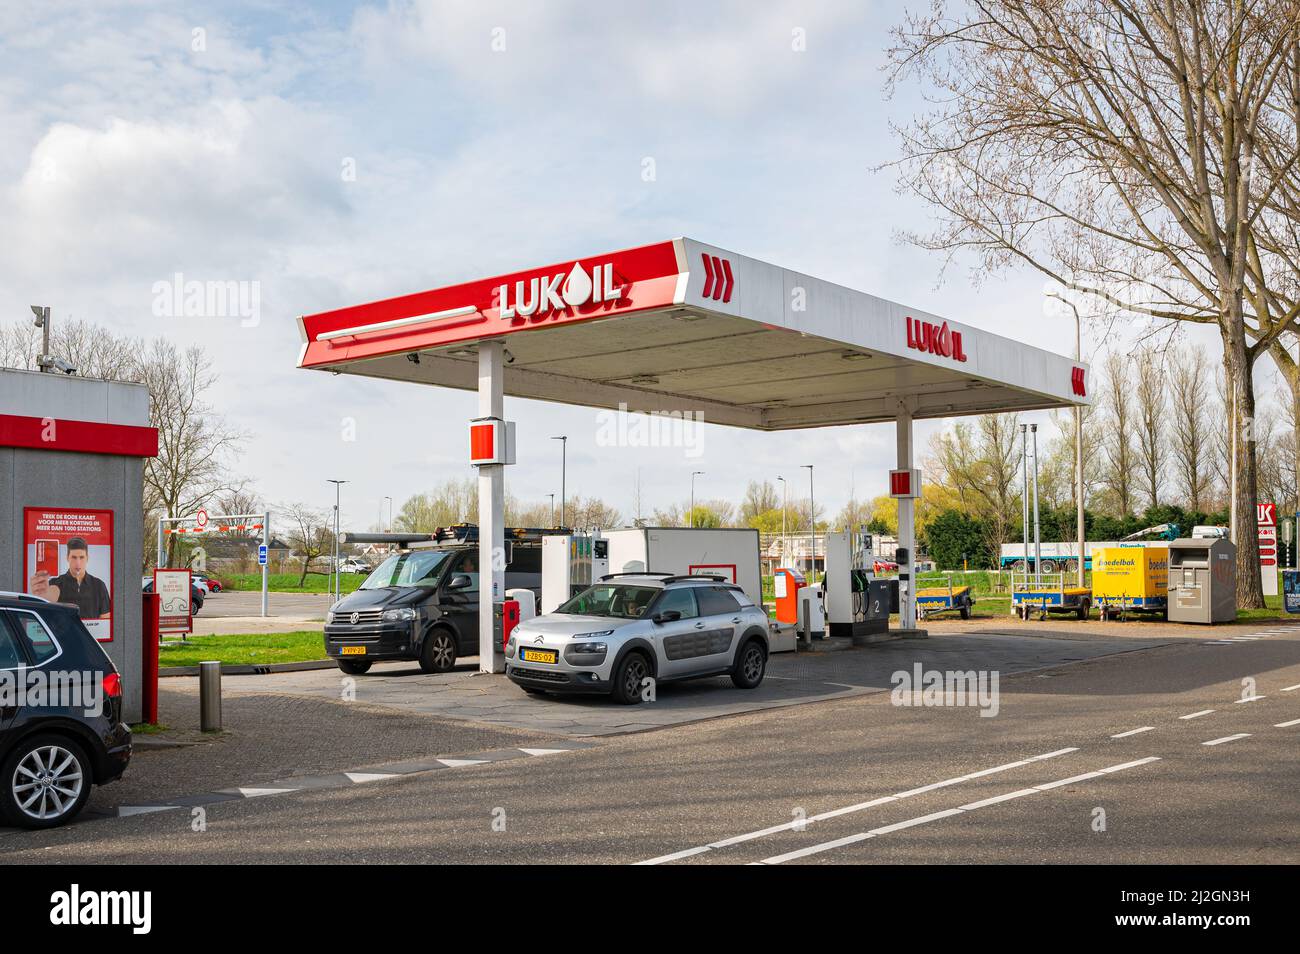 Lukoil gas station and store Stock Photo